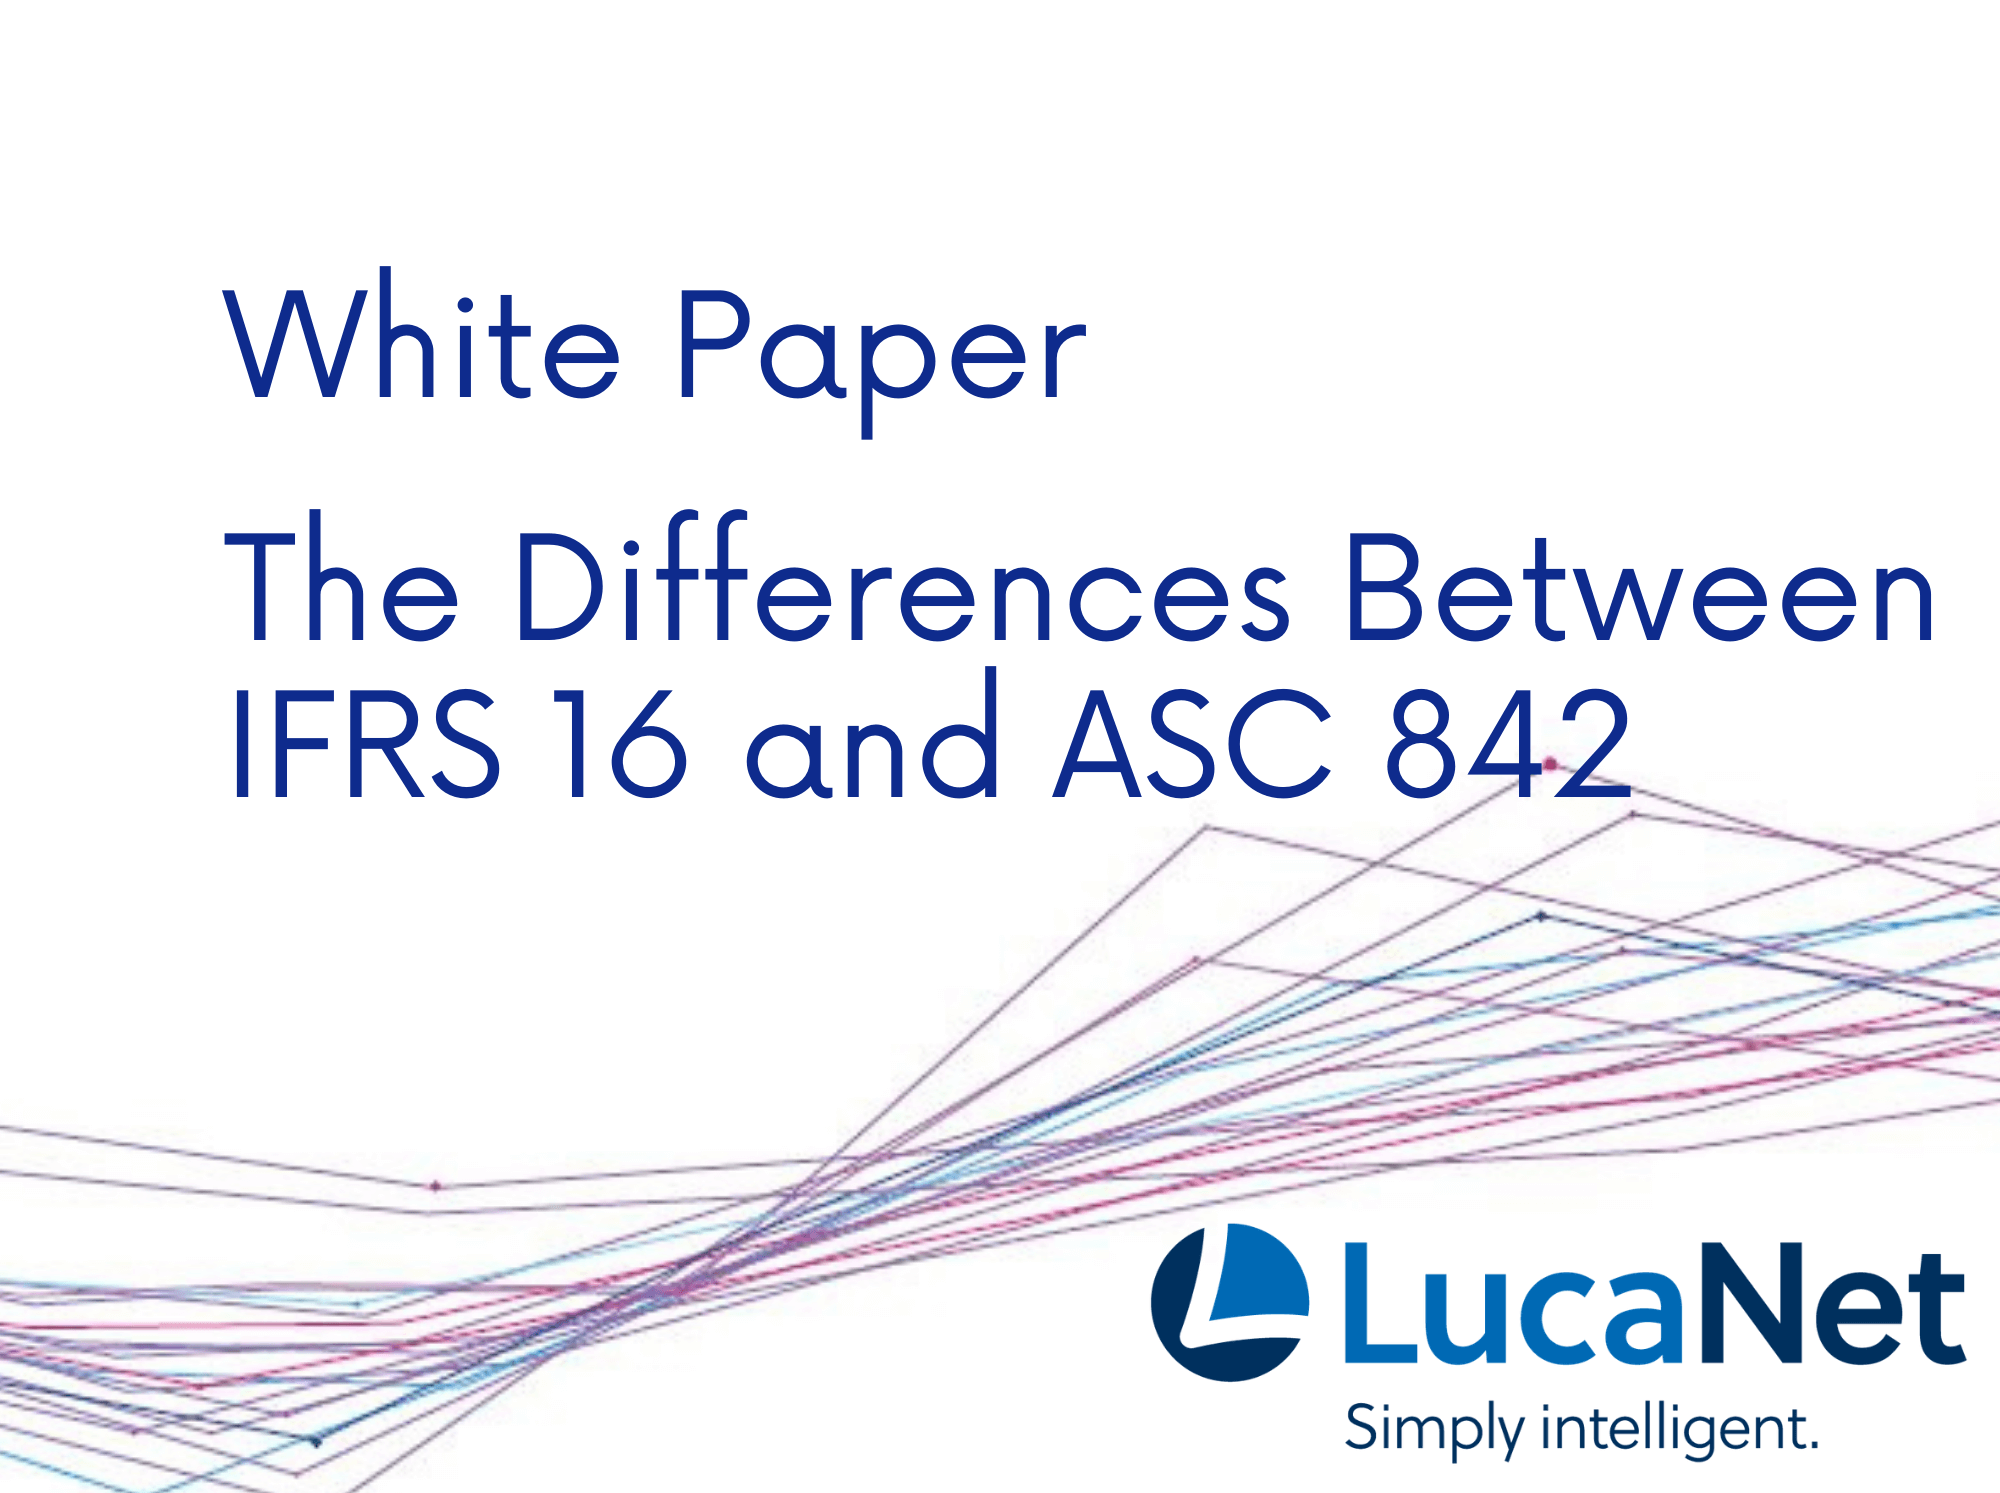 LucaNet White Paper: The Differences Between IFRS 16 and ASC 842